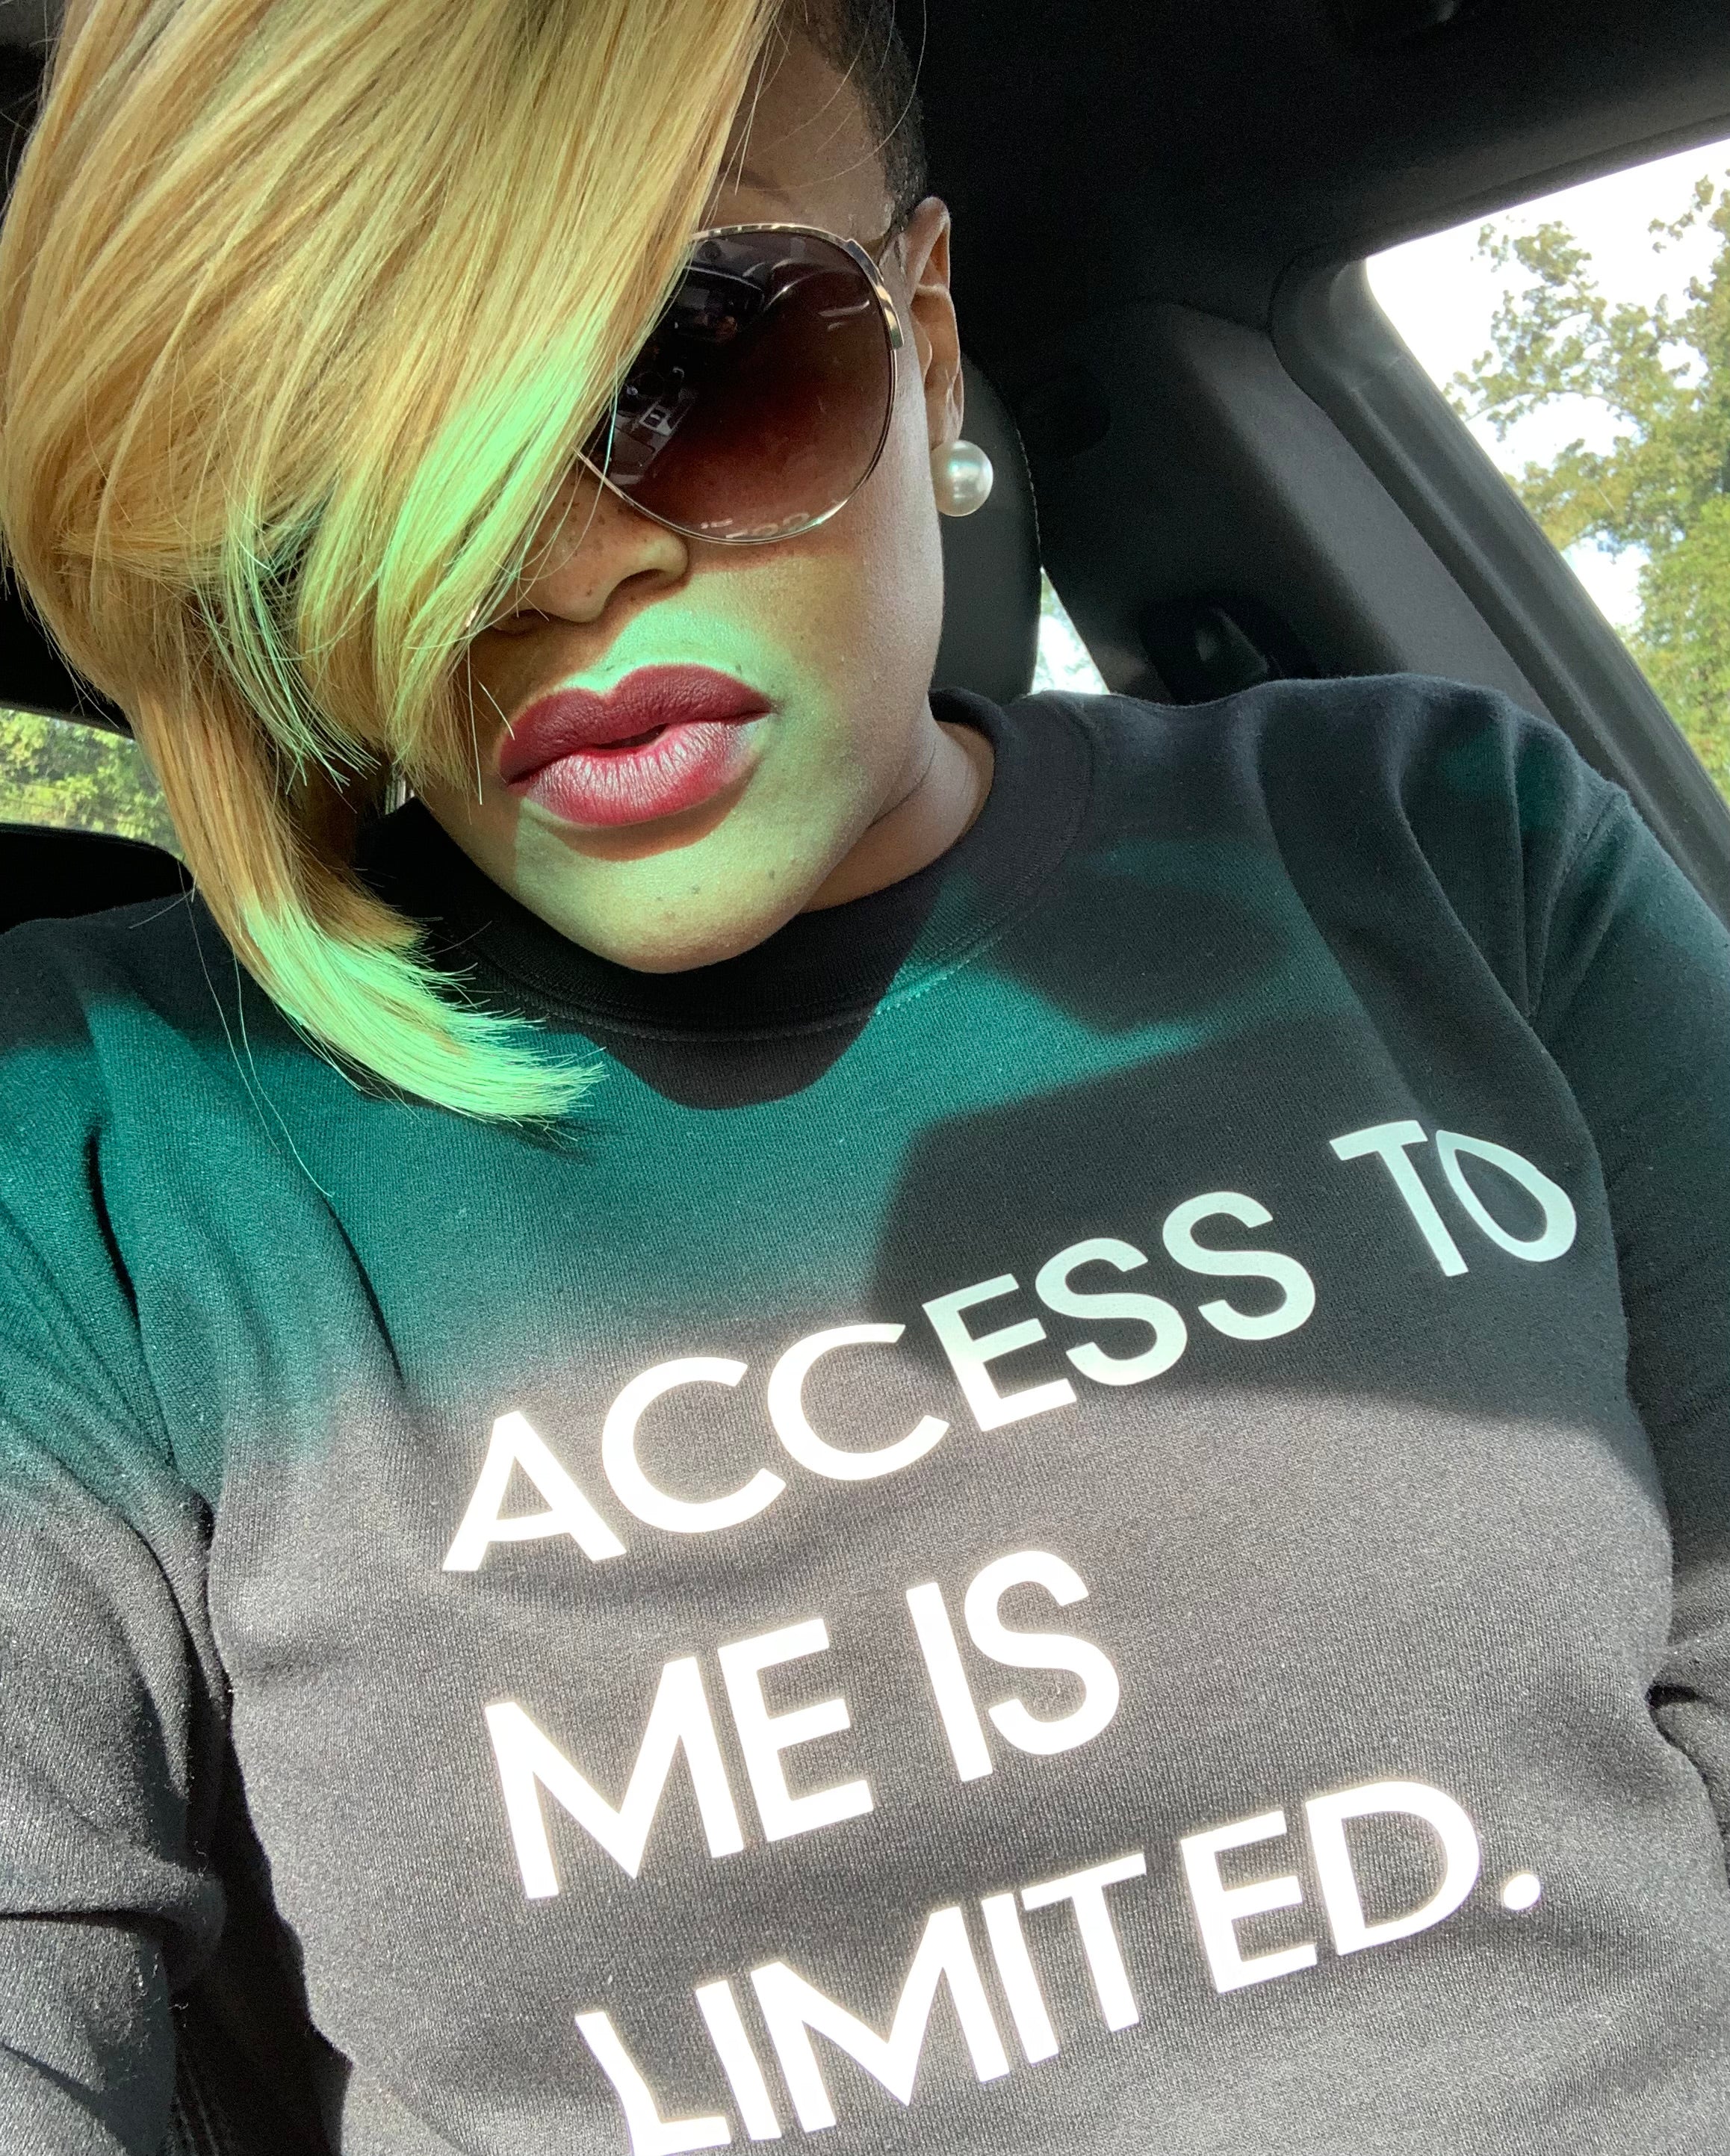 Access to Me is Limited Sweatshirt